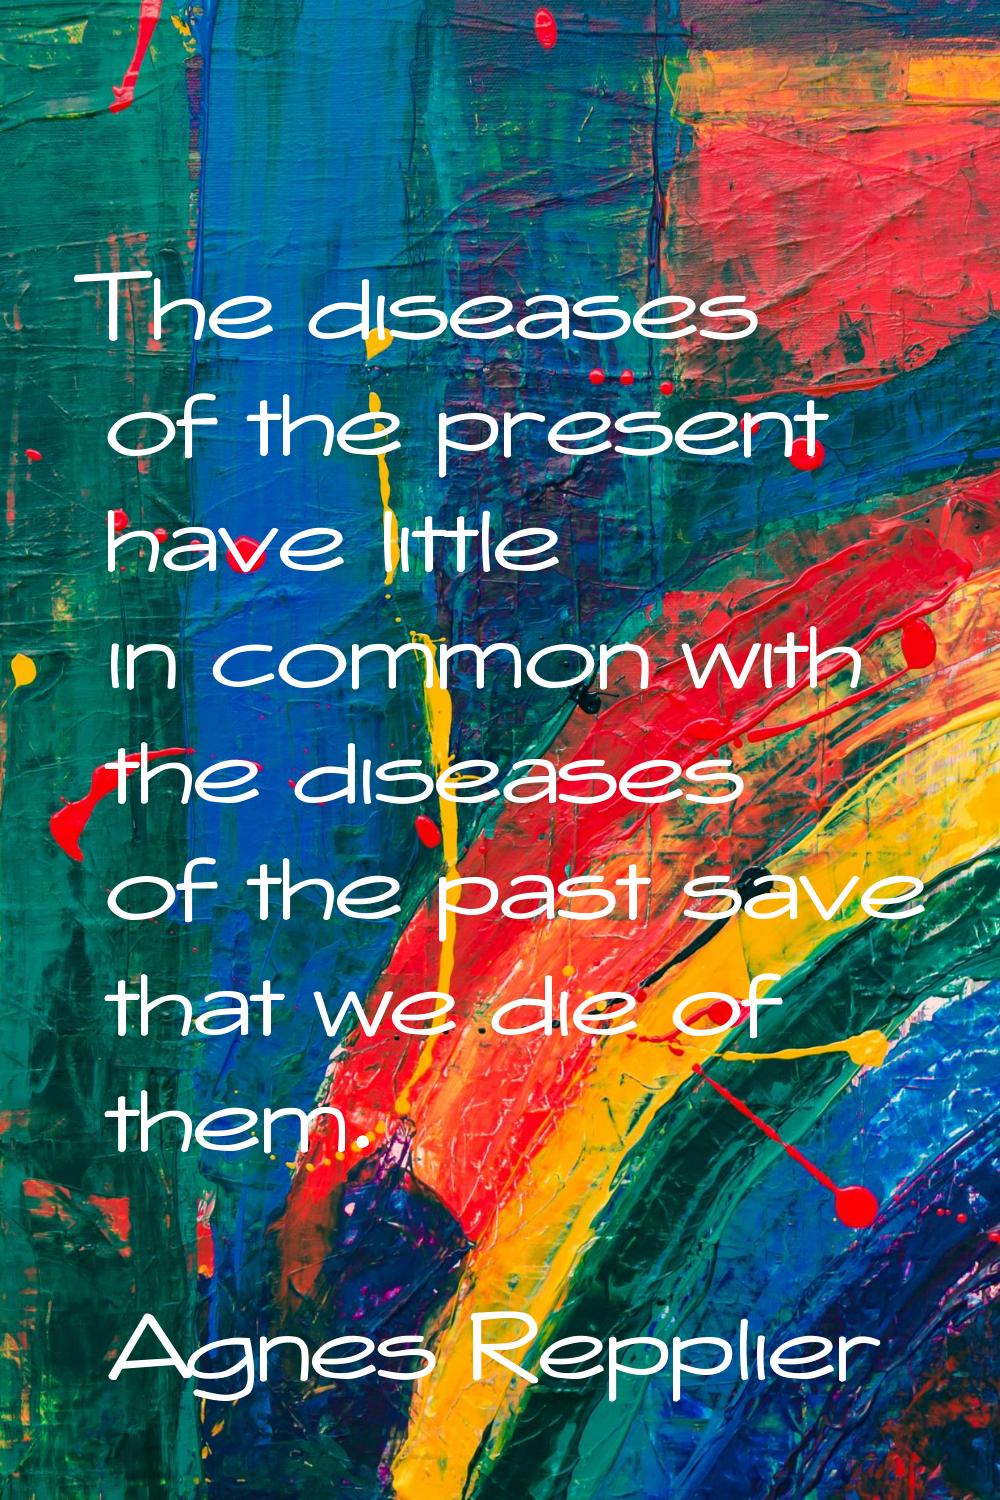 The diseases of the present have little in common with the diseases of the past save that we die of